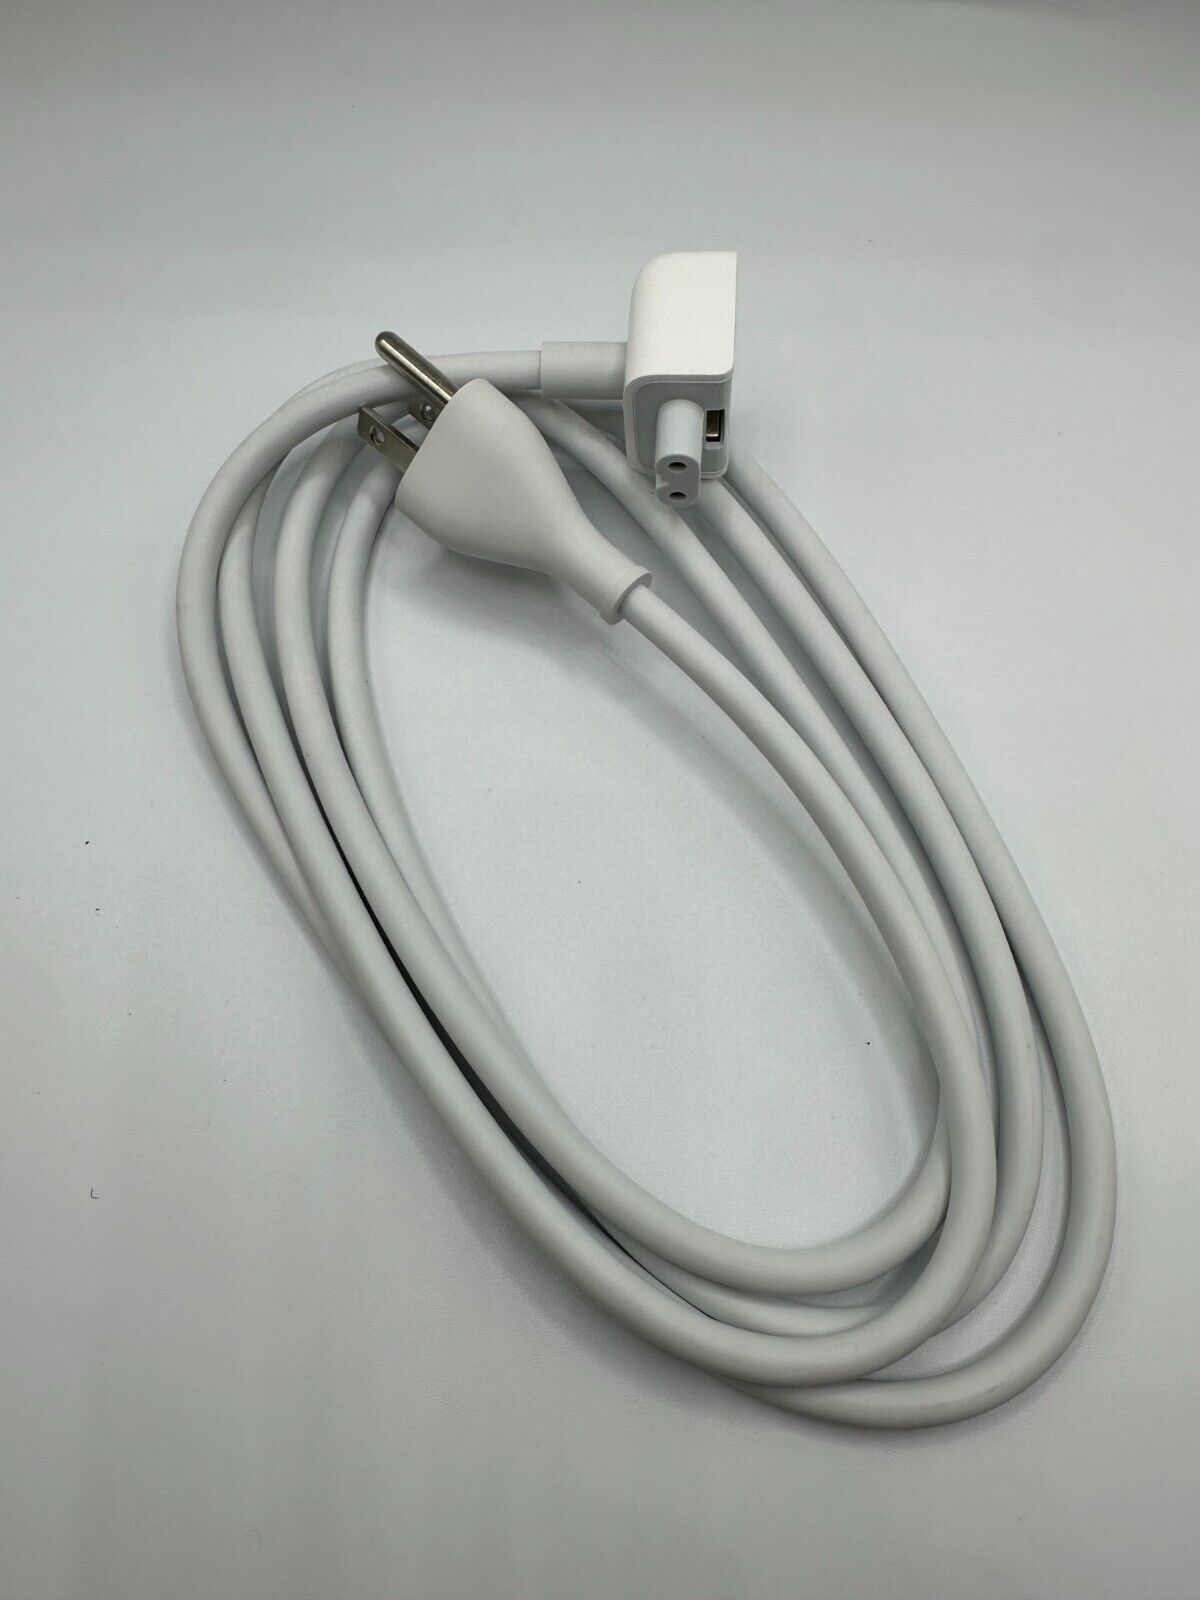 APPLE OEM Power Extension Cable 6ft for Macbook, Macbook Air, Pro 2.5A 125V-NEW